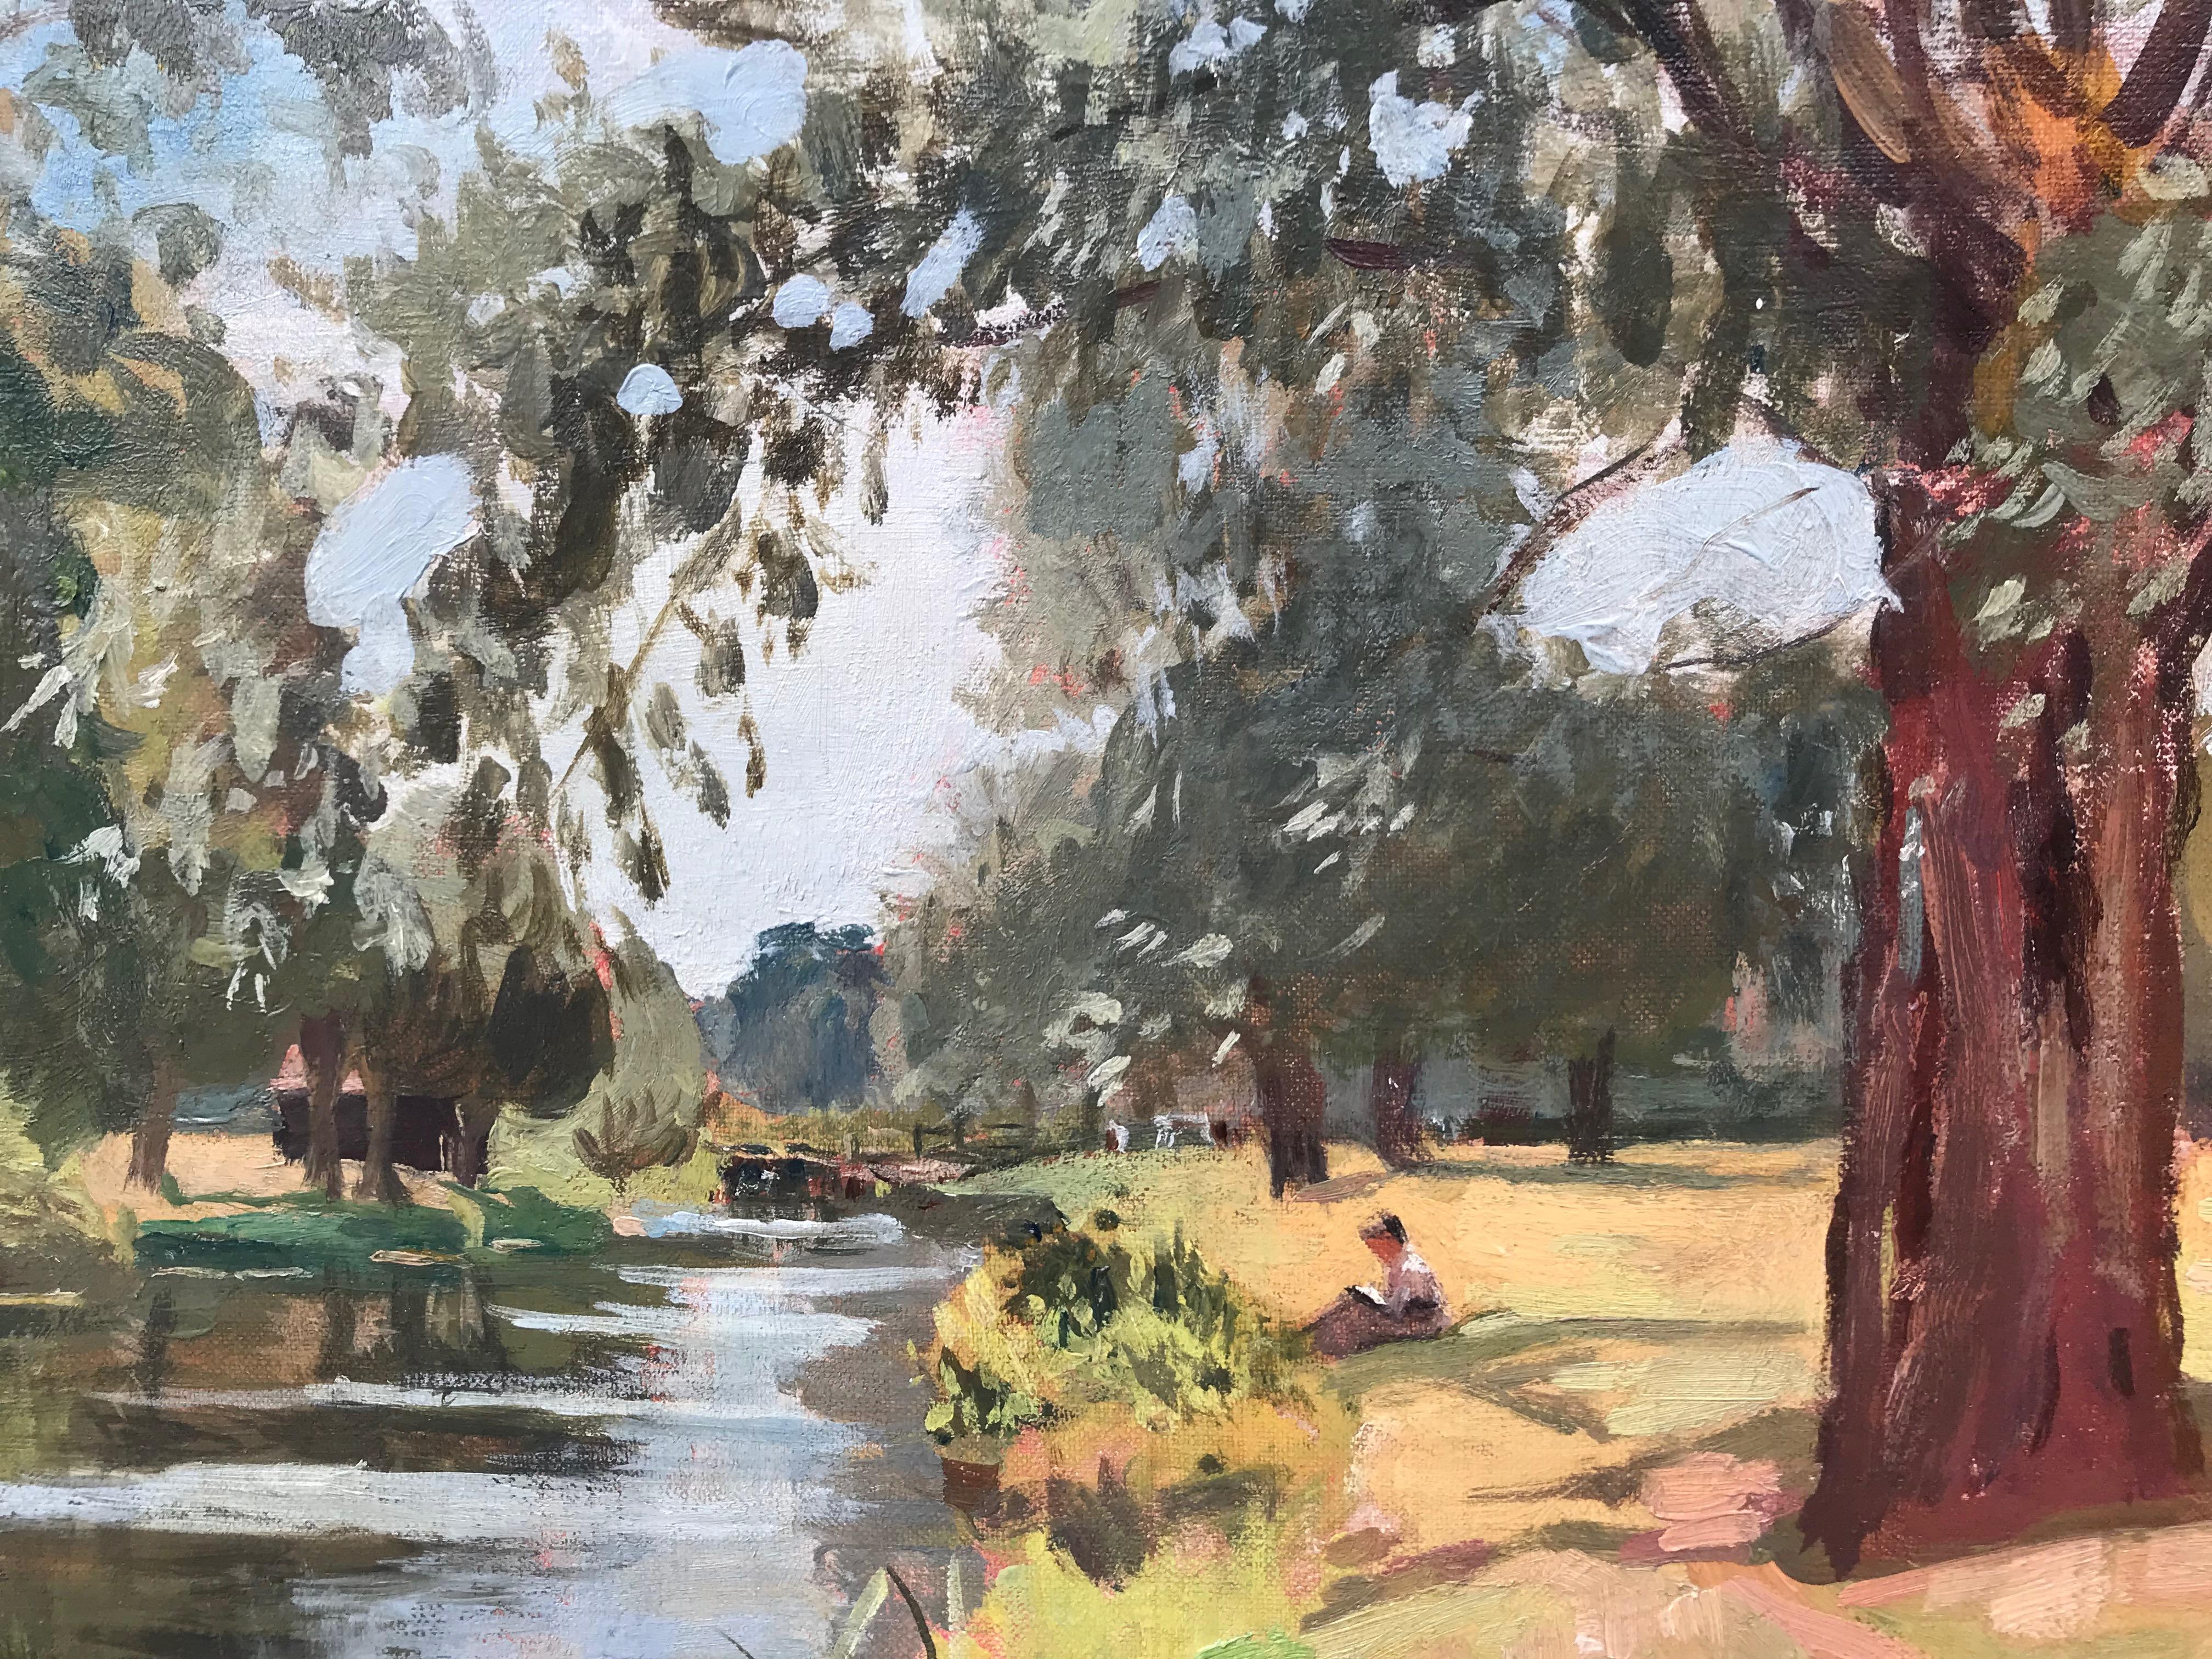 Edward SEAGO (1910-1974, British)
Seated Figure Reading by a River
Oil on canvas
Stamped signature on reverse
Framed 18 ½ x 22 ¾ inches

Provenance: Private Estate, Maryland

A beautifully warm and serene depiction of a riverside landscape at the